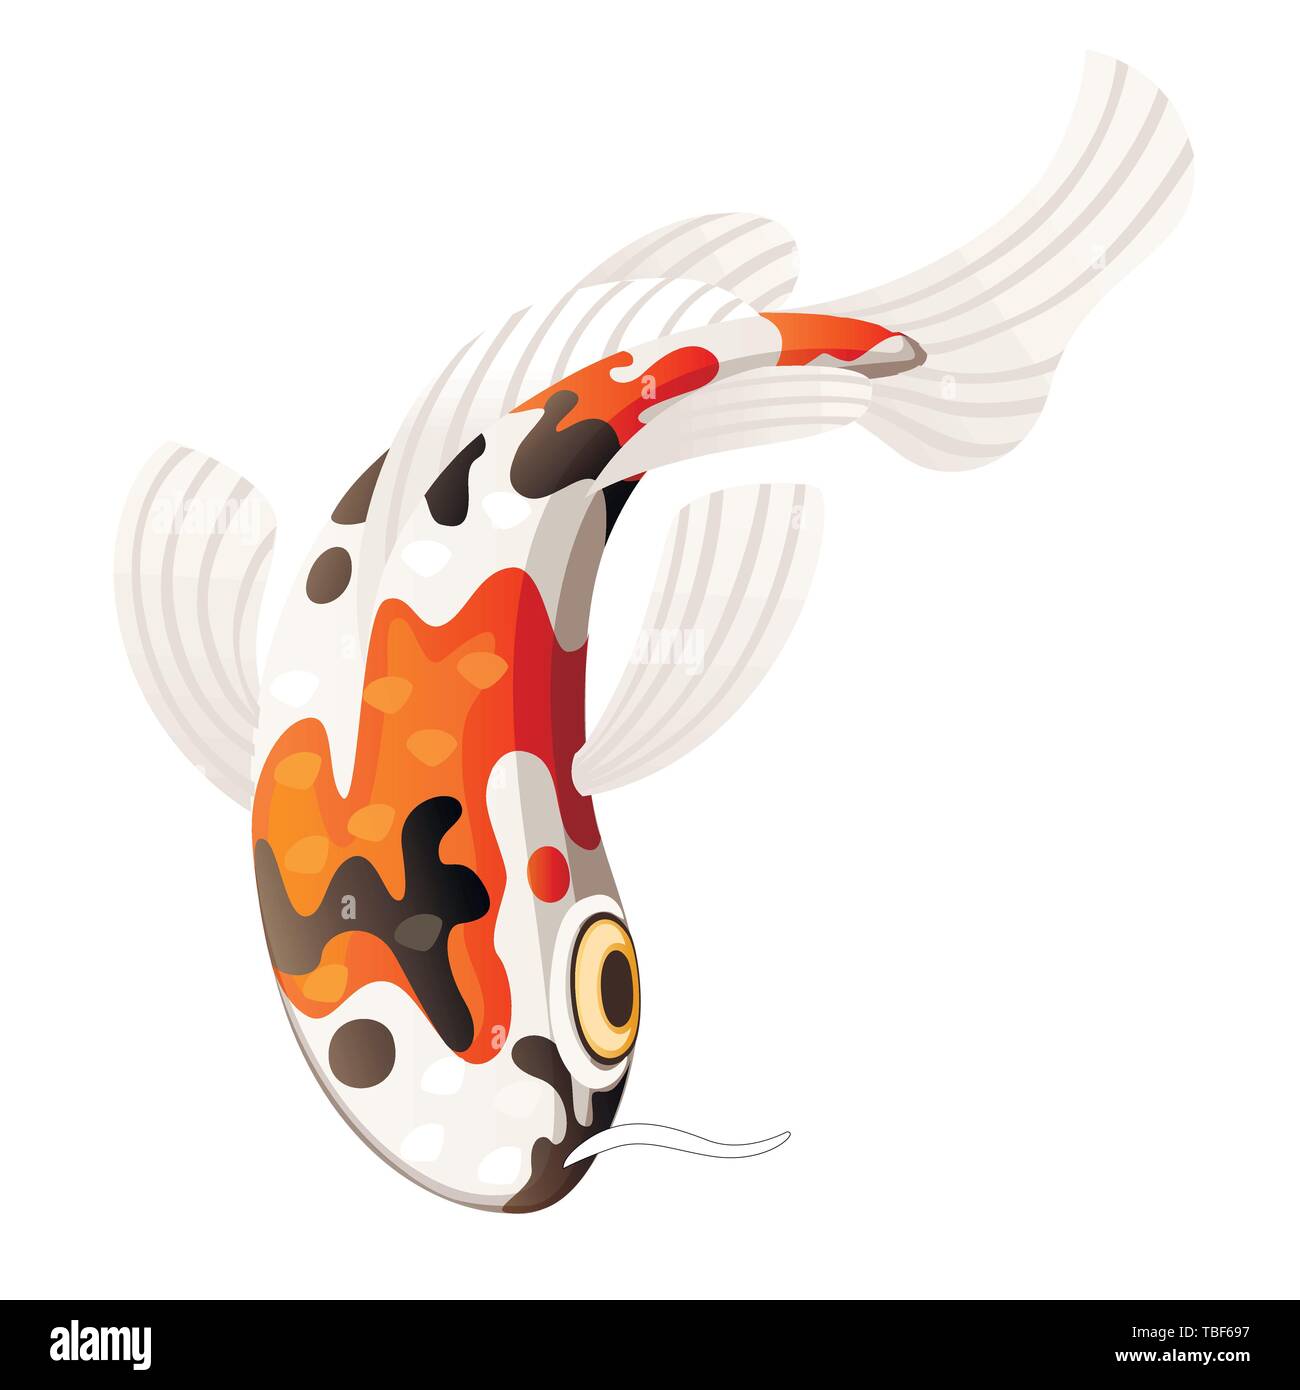 Koi carp japanese symbol of luck fortune prosperity red and black dotted koi carp cartoon flat vector illustration isolated on white background. Stock Vector